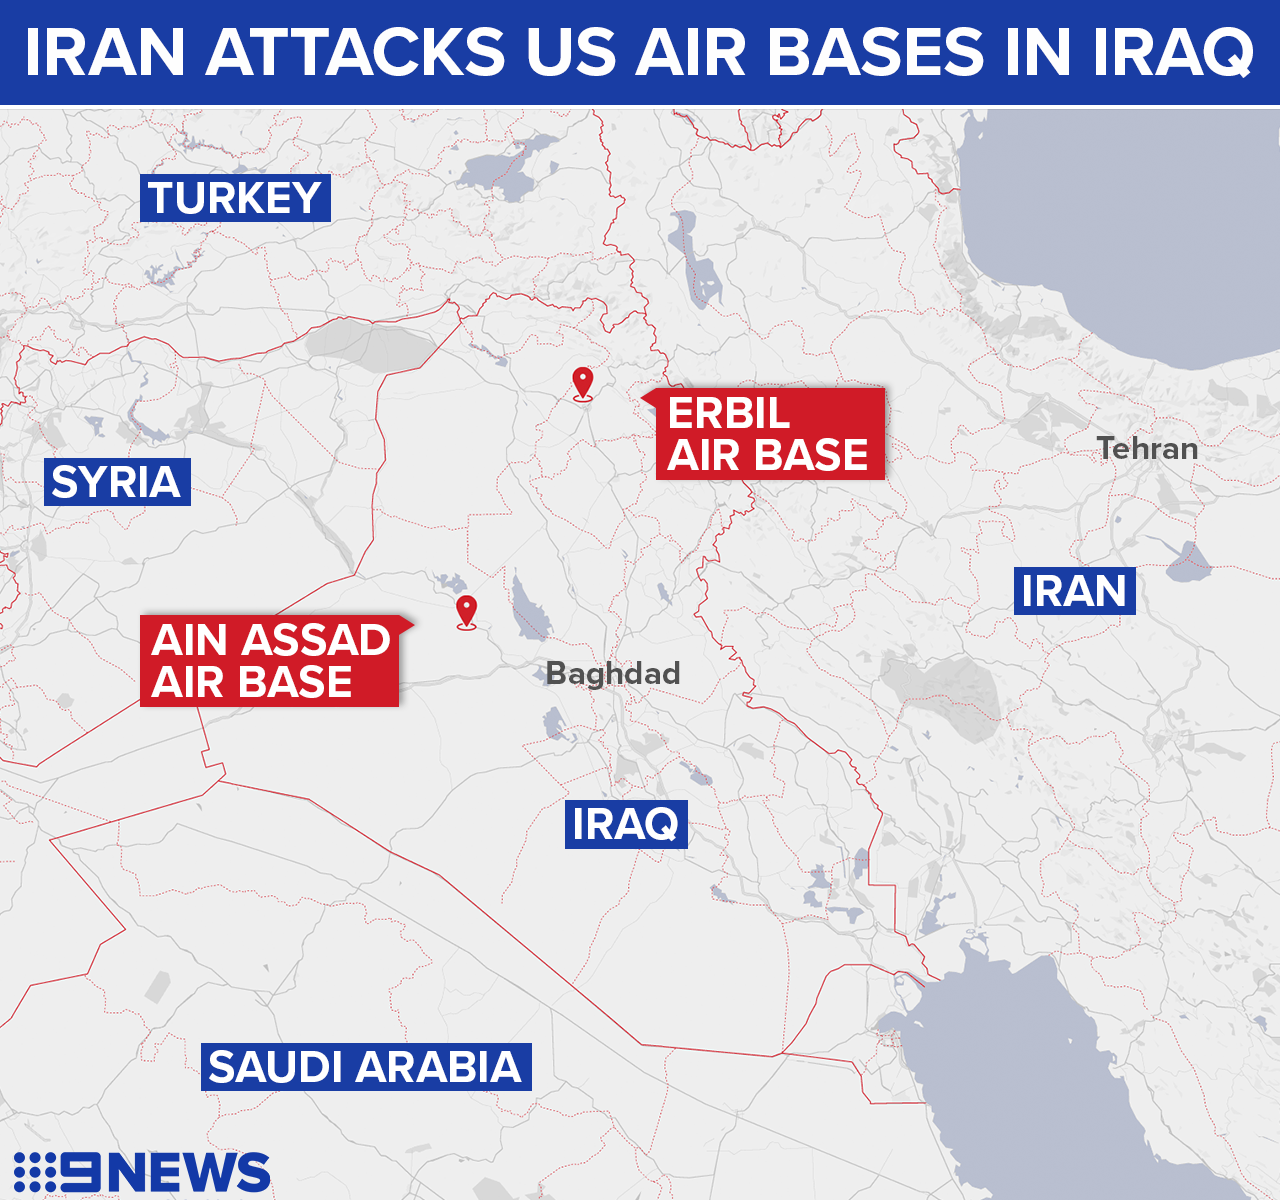 Iranian forces attacked Ain Assad Air Base in central Iraq and Erbil Air Base in Iraqi Kurdistan.